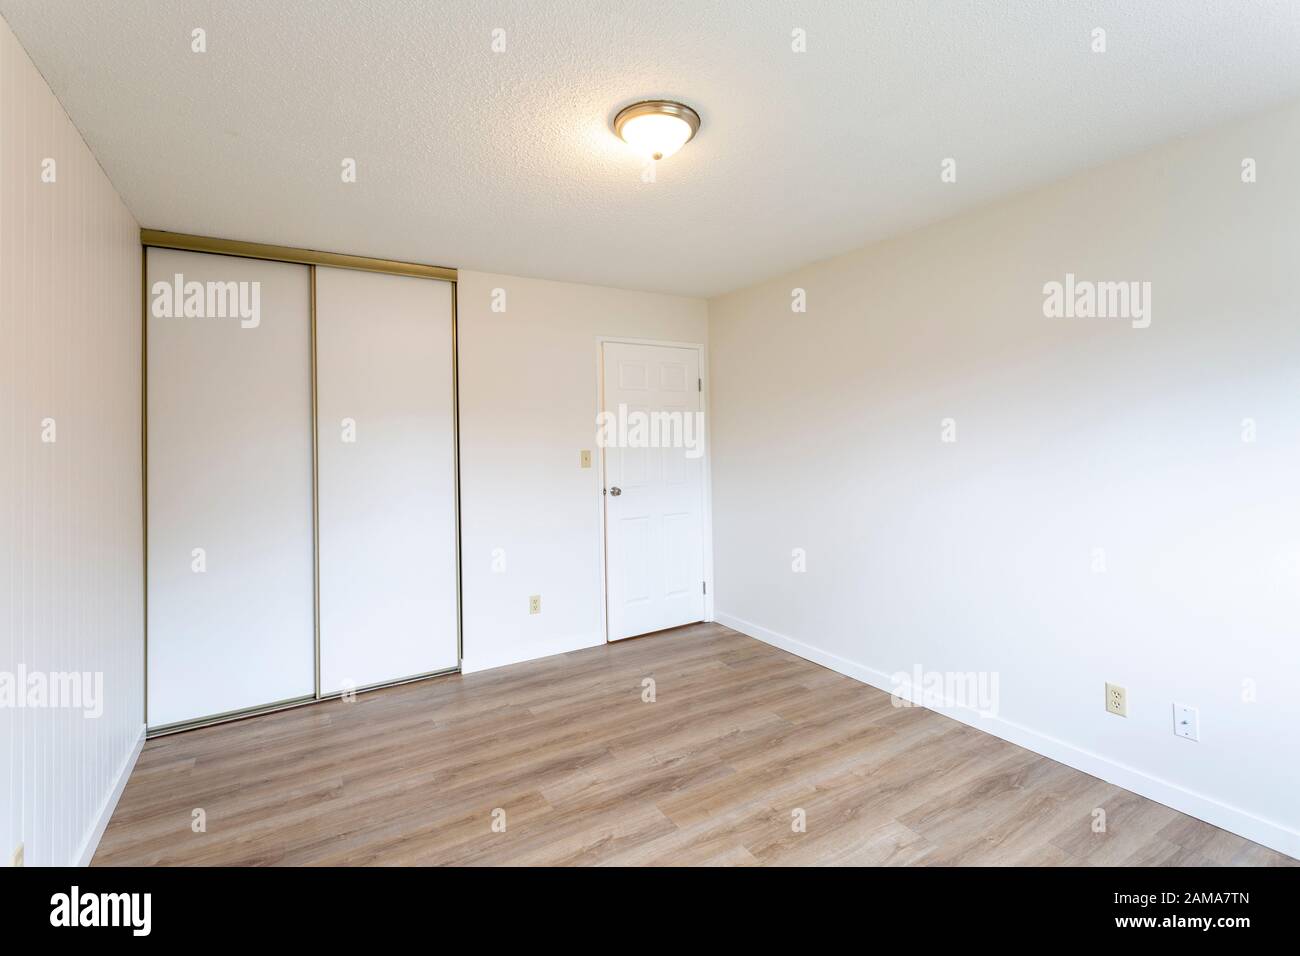 Interior of empty renovated apartment condo rental unit with white walls and new hard wood vinyl laminate flooring. Stock Photo